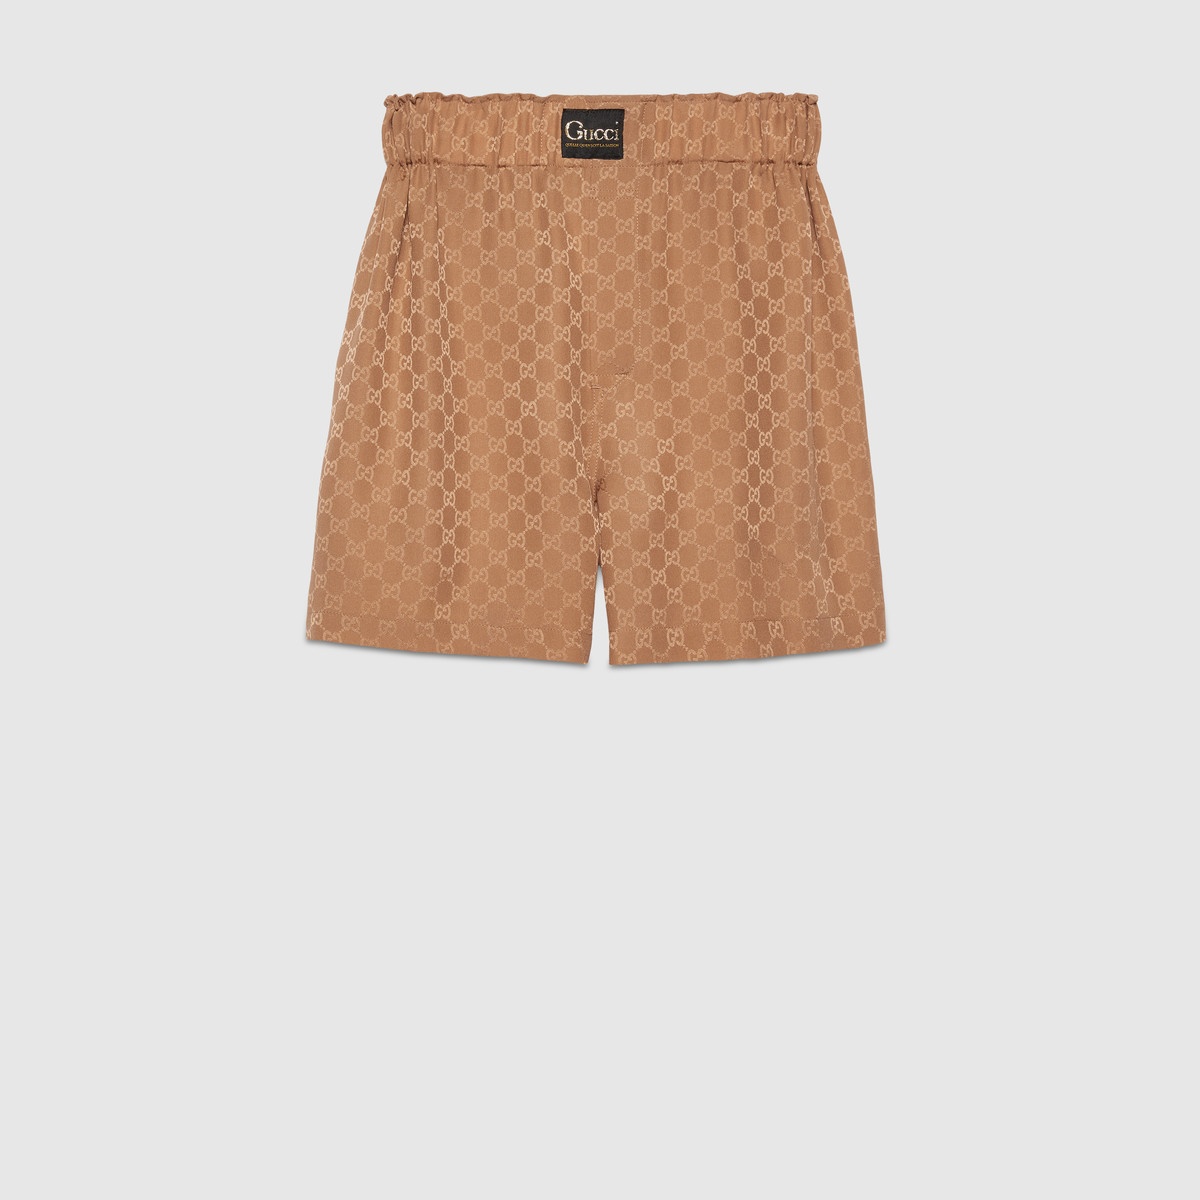 GG silk shorts with Gucci label - 1